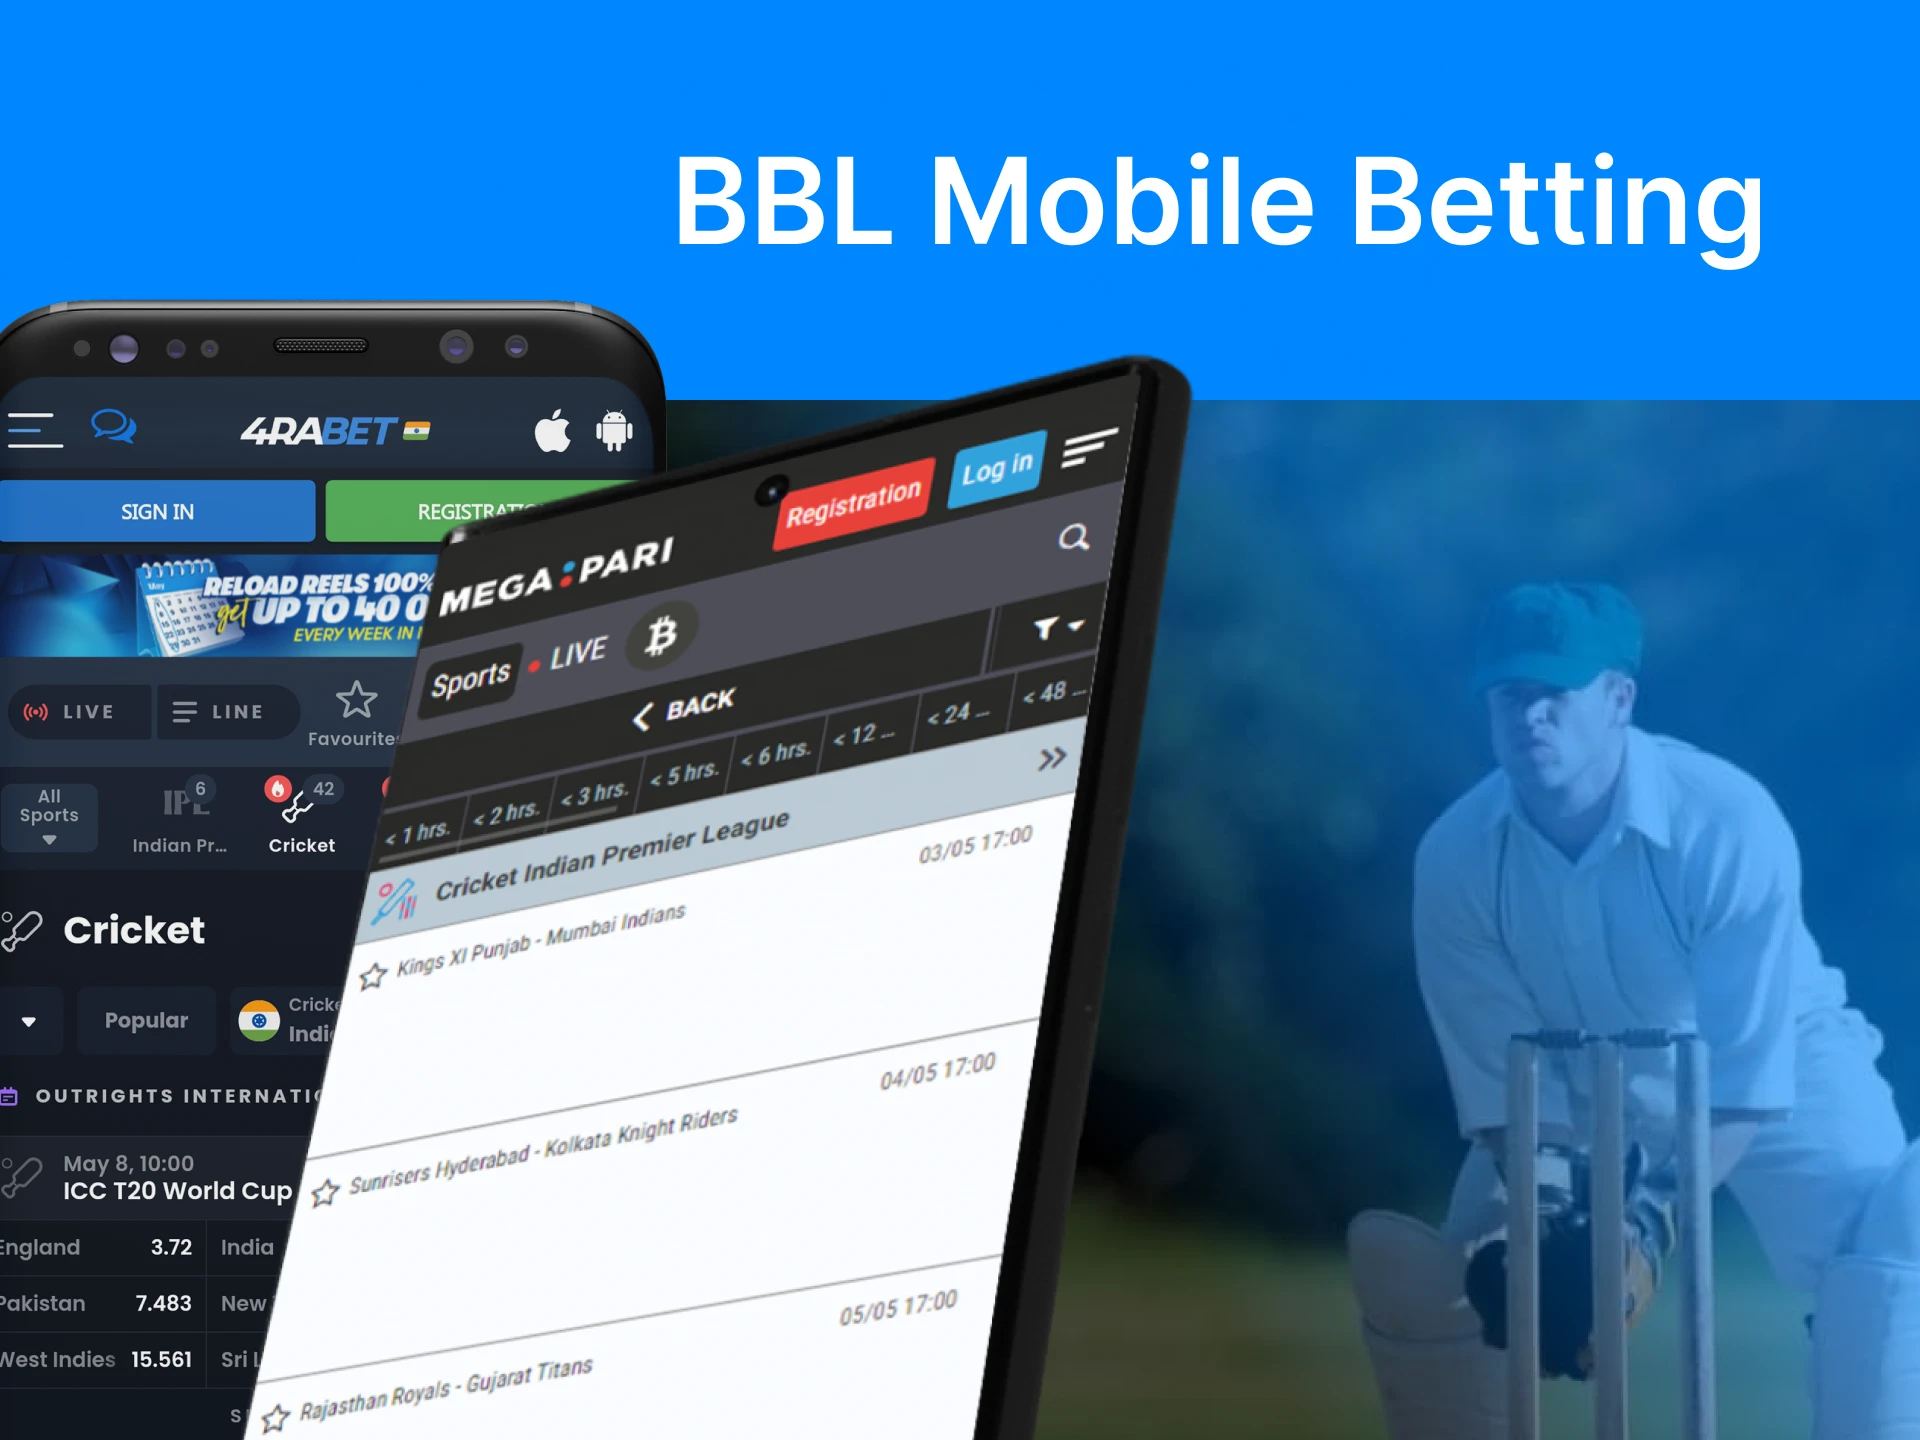 You can place bets on the BBL in cricket betting apps.